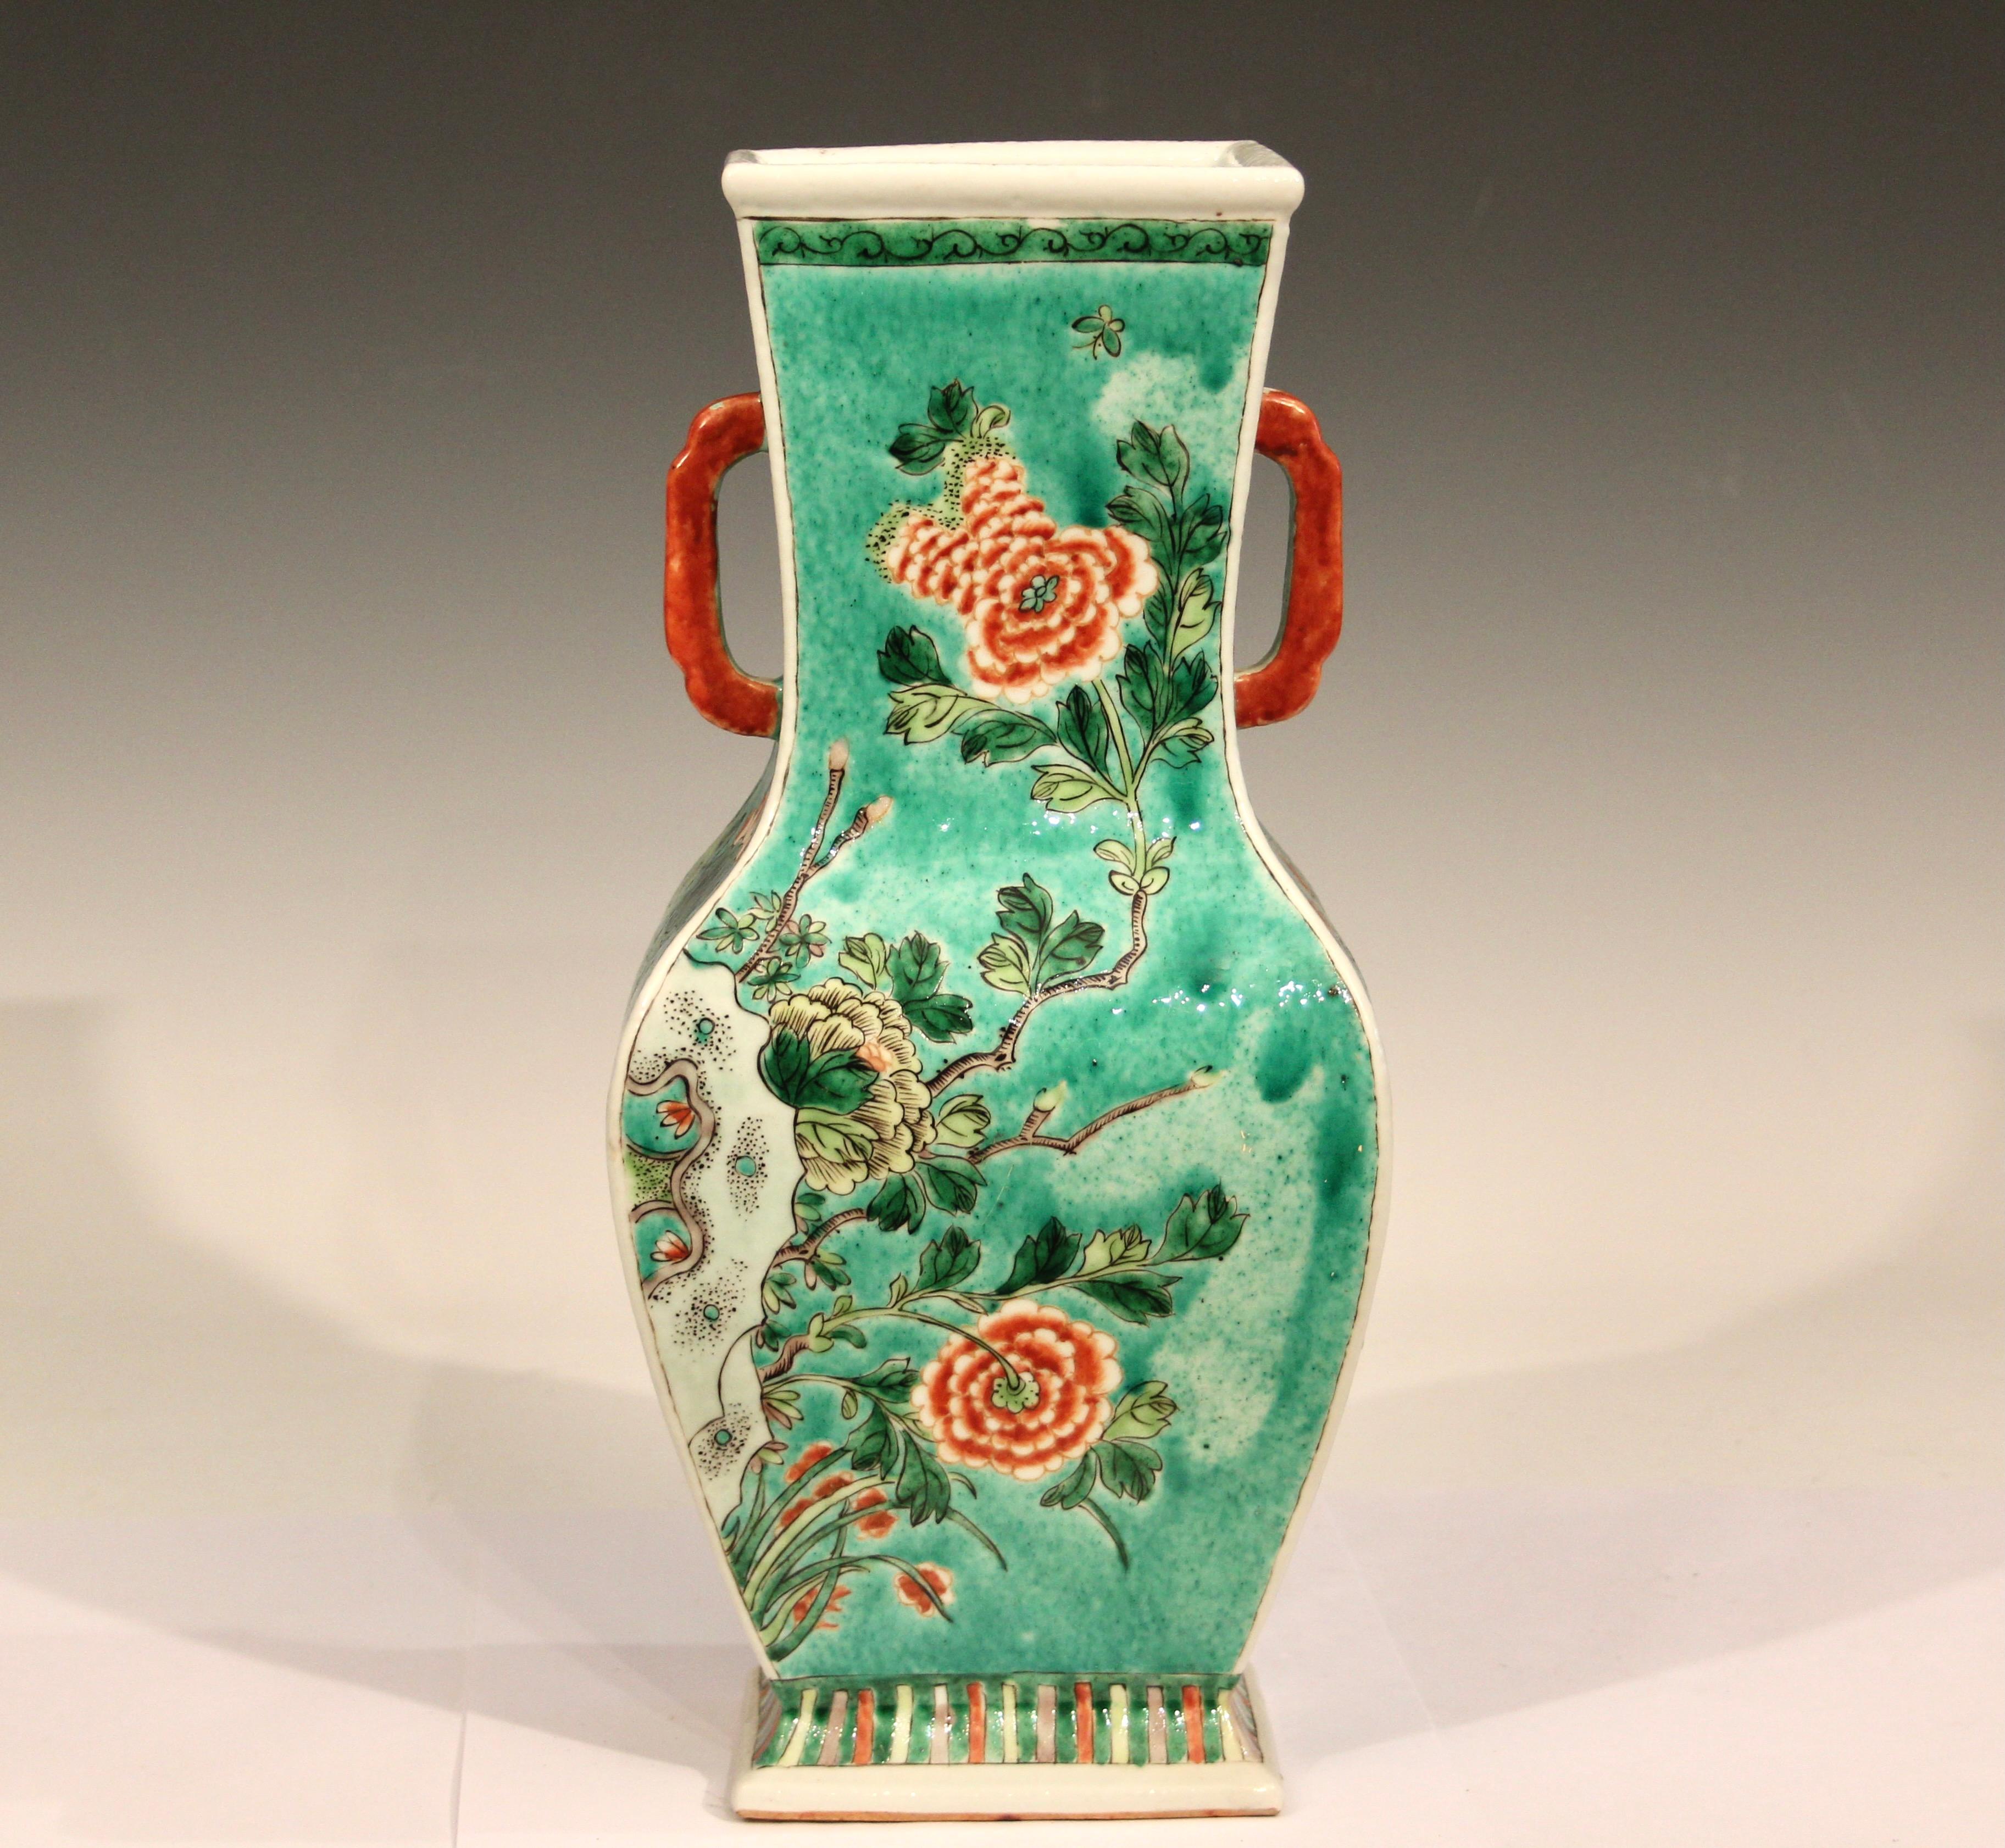 Antique Chinese porcelain, slab built, Famille Verte square vase, circa early 20th century. Decorated on each side with scenes of flora and fauna. Measures: 13 3/4